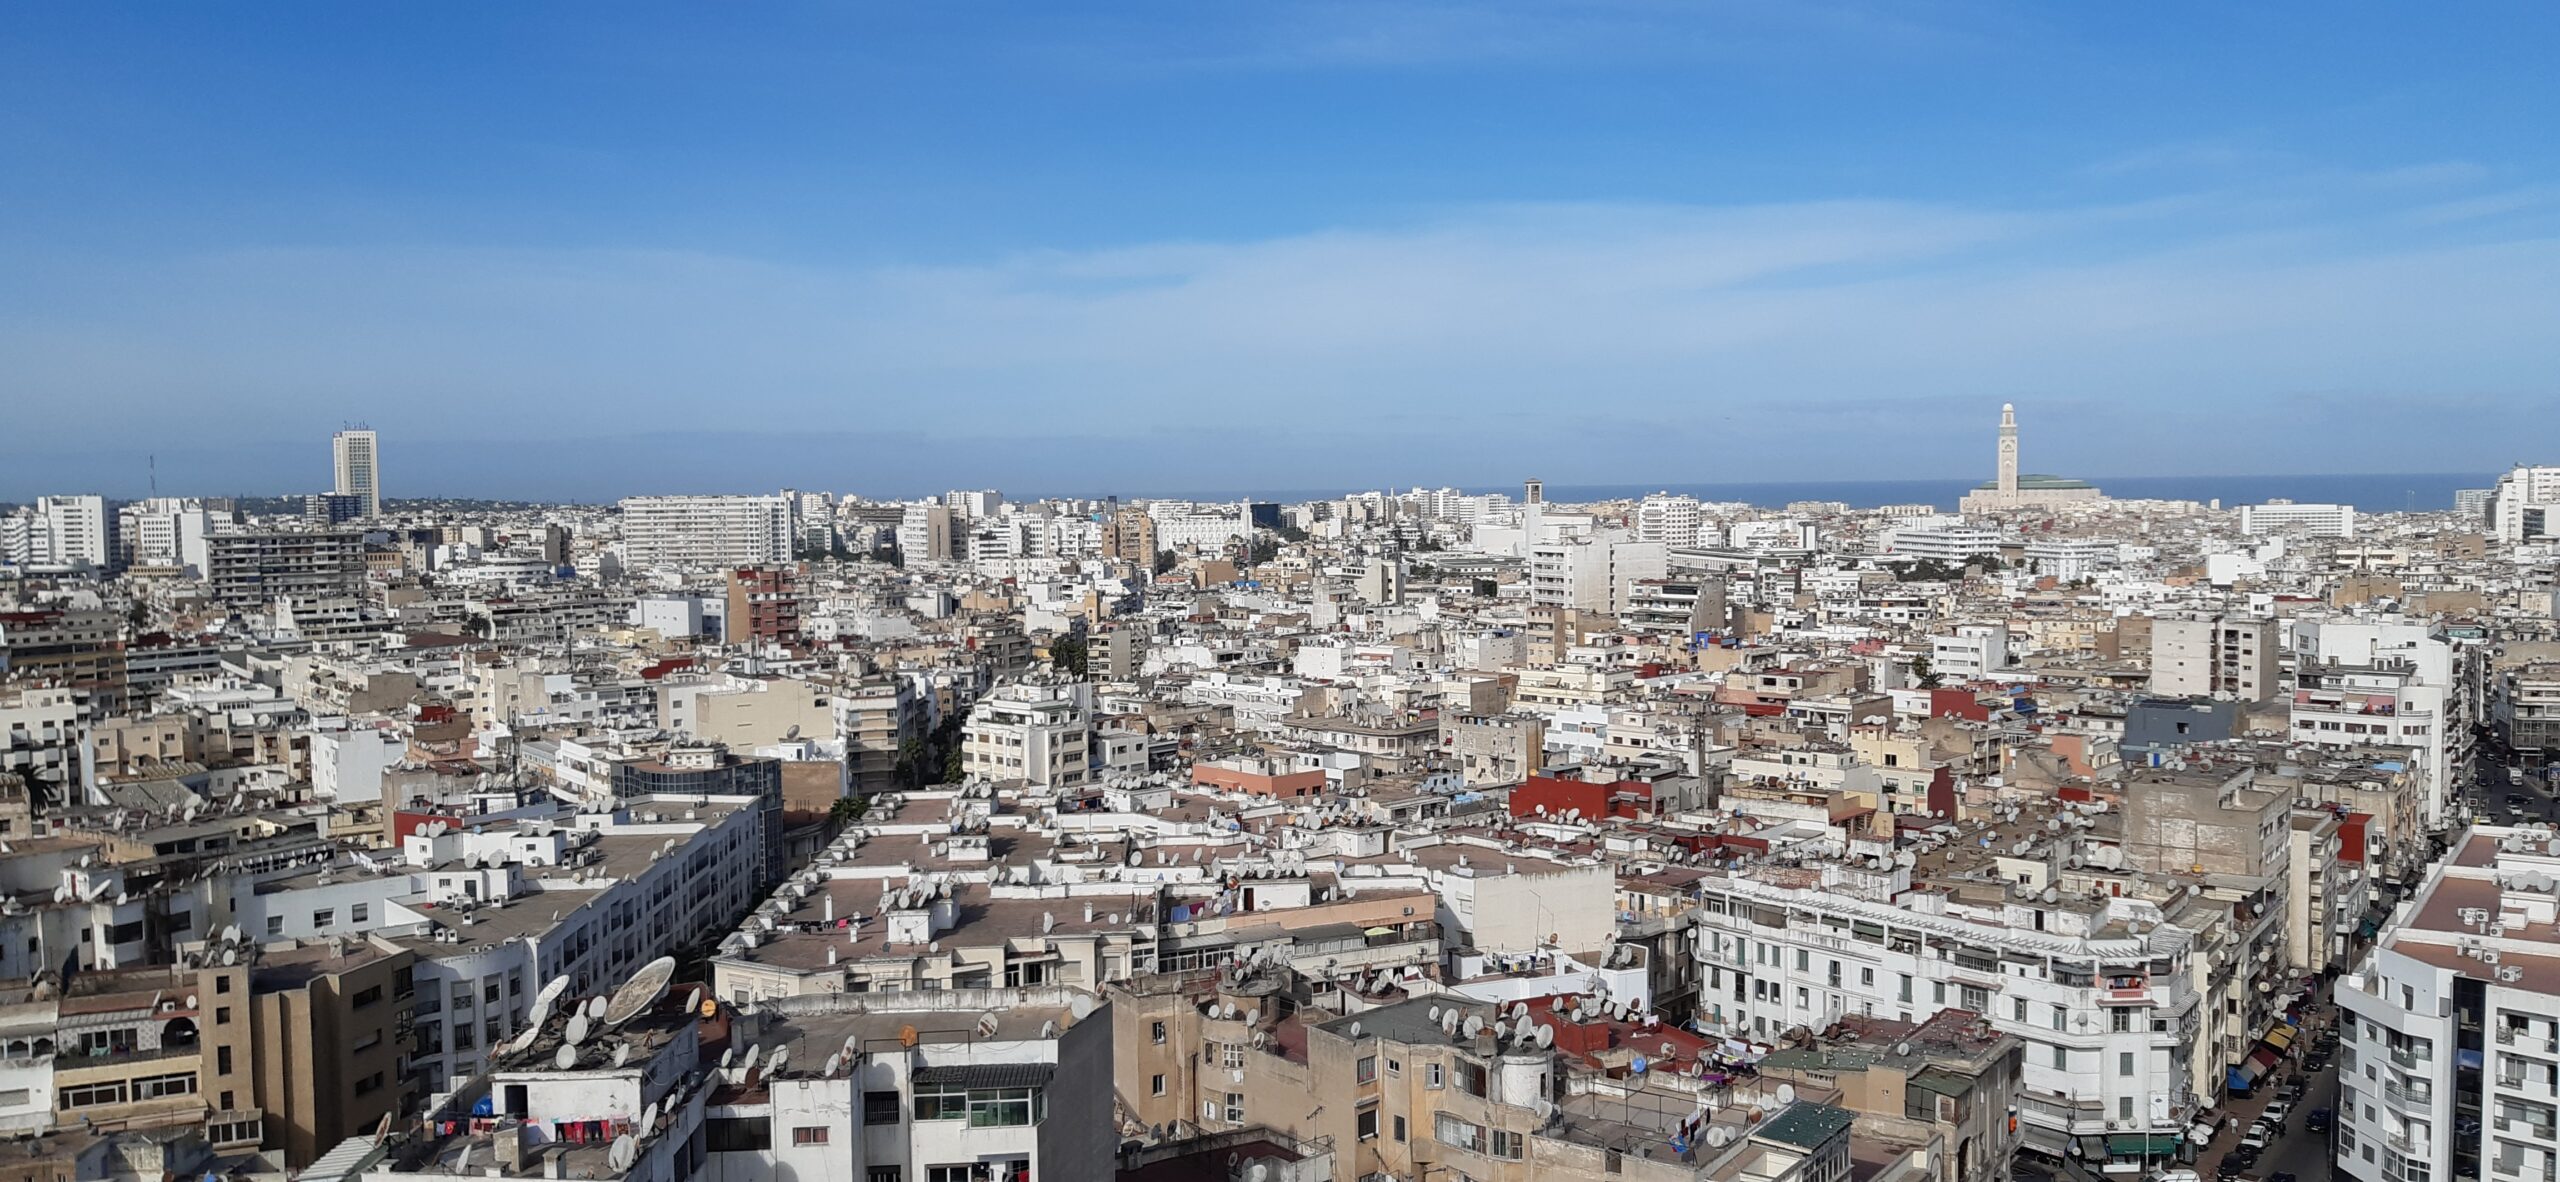 Enjoy The Sights, Smells And Sounds Of Casablanca On Our Casablanca Private Tour From Rabat